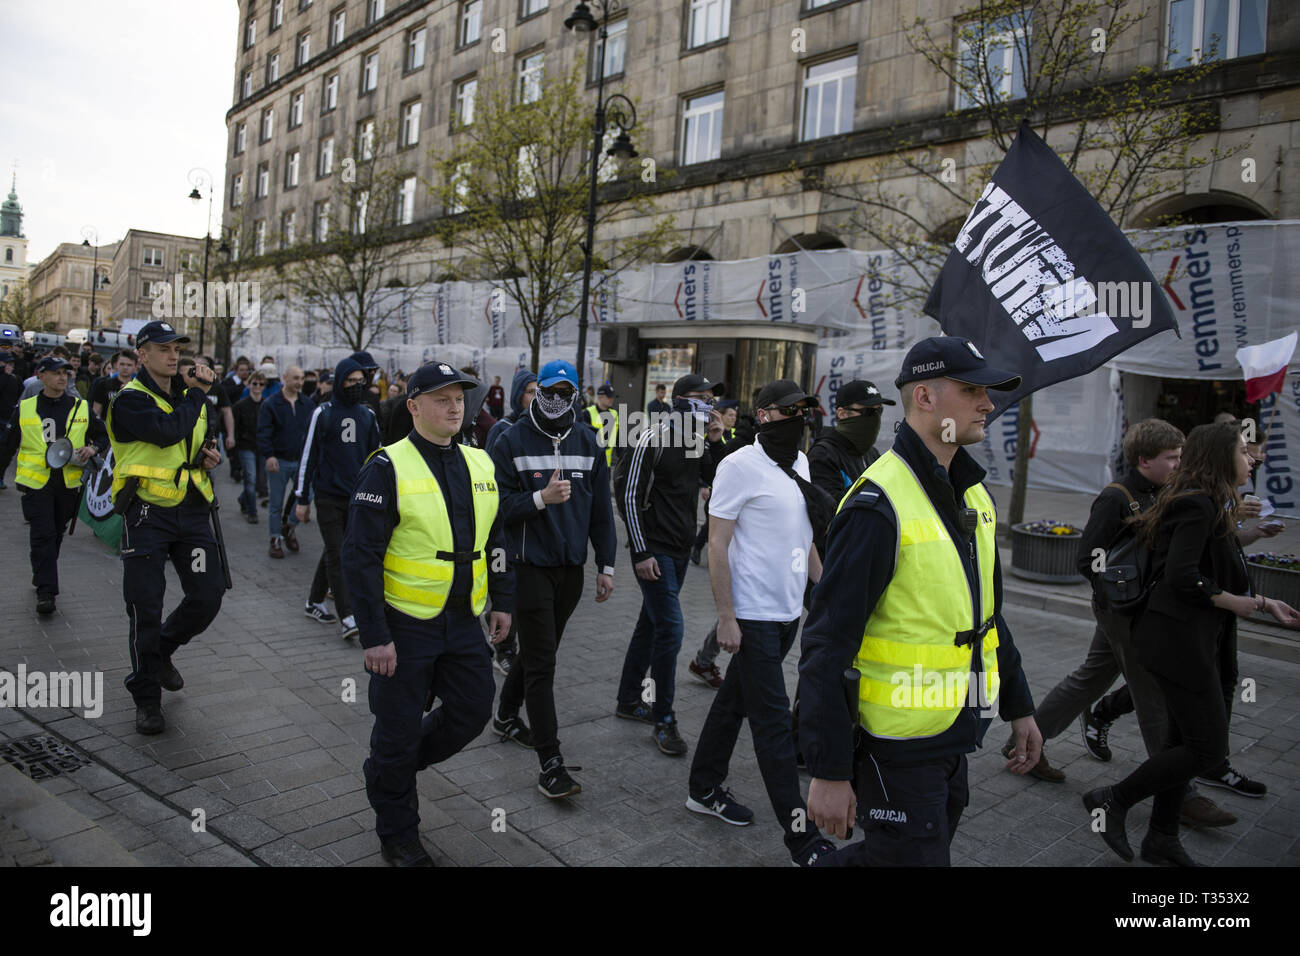 Warsaw, Mazowieckie, Poland. 6th Apr, 2019. Nationalists seen with flags and marching through the streets surrounded by police forces during th protest.''Universities free from Marxism'' a protest against the Warsaw University to express their opposition to the activity of leftist extremists and other cases of left-wing indoctrination of Polish students. In the same place, students, leftist and anti-fascist activists gathered under the slogan ''Here we learn, do not heil''. Both groups were separated by a large police cordon. Credit: Attila Husejnow/SOPA Images/ZUMA Wire/Alamy Live News Stock Photo